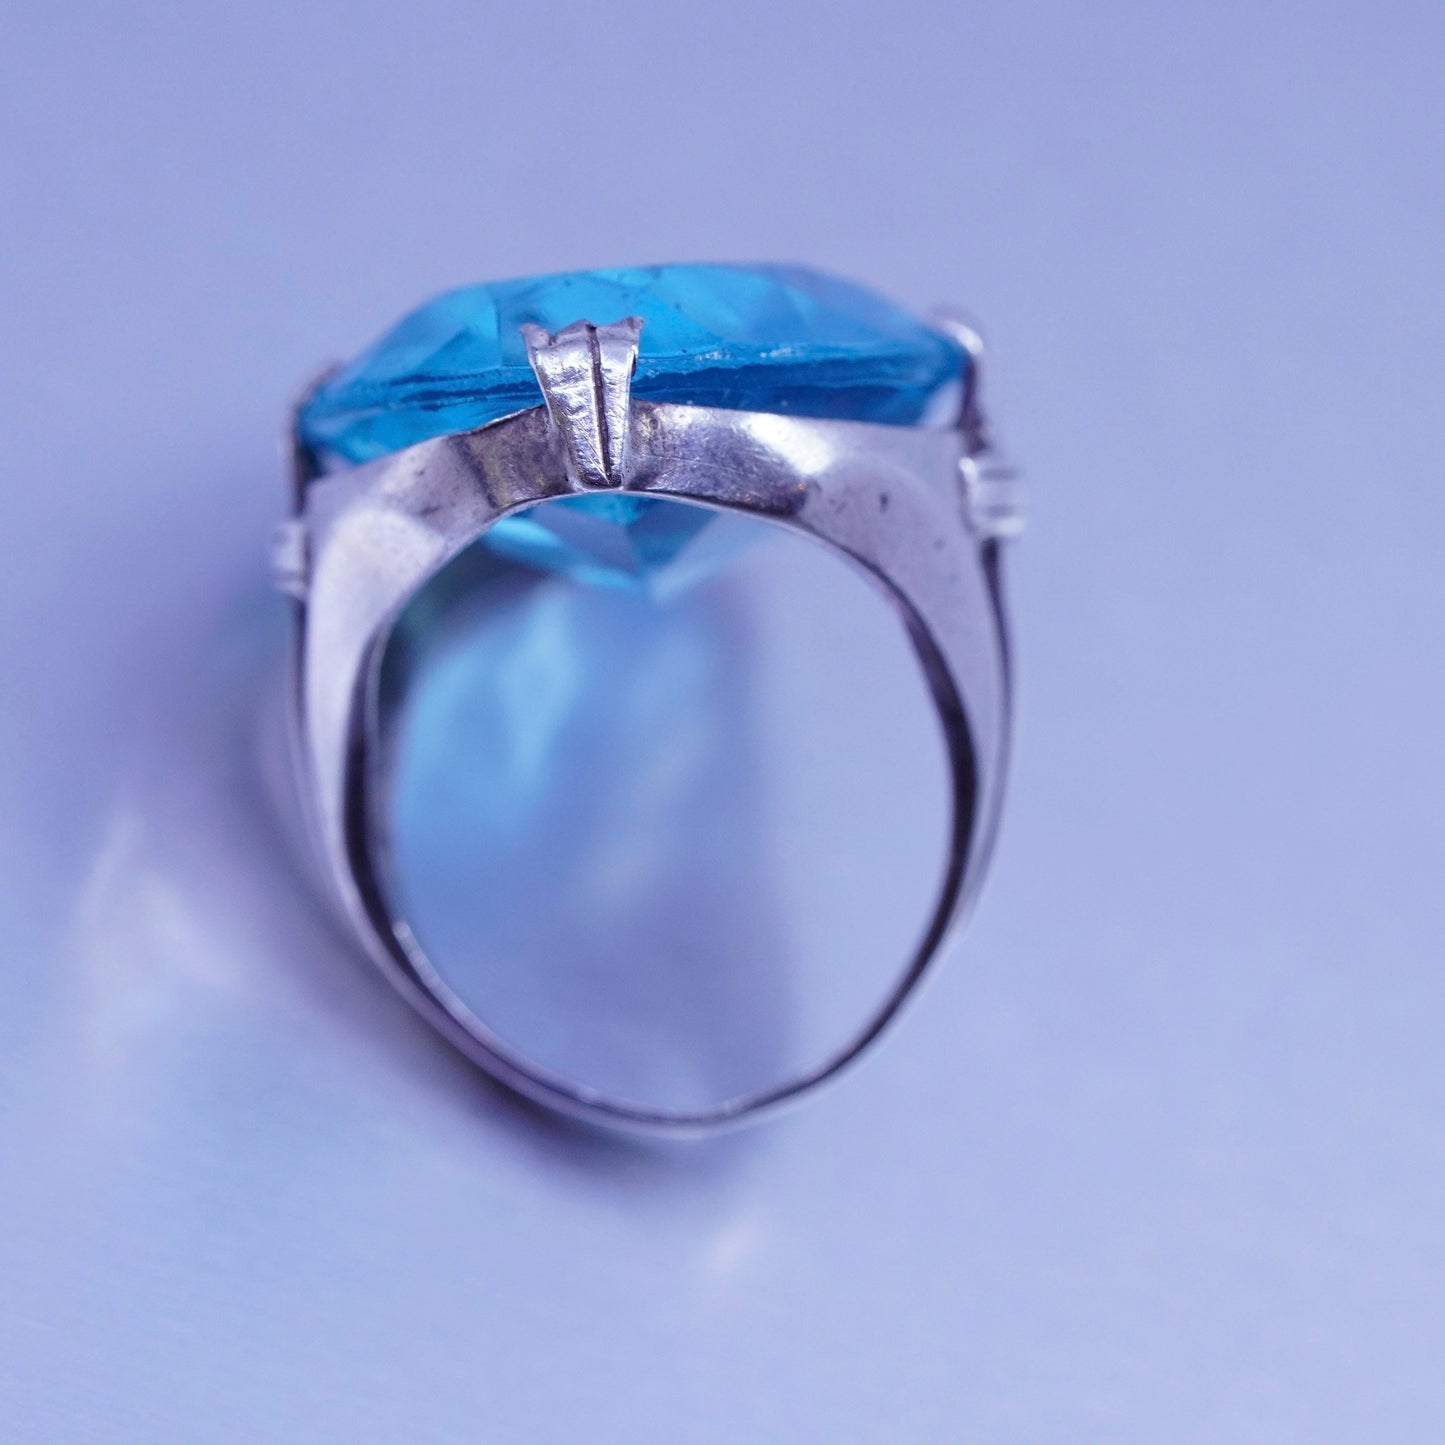 Size 3.5, vintage Sterling 925 silver handmade cocktail ring with blue glass